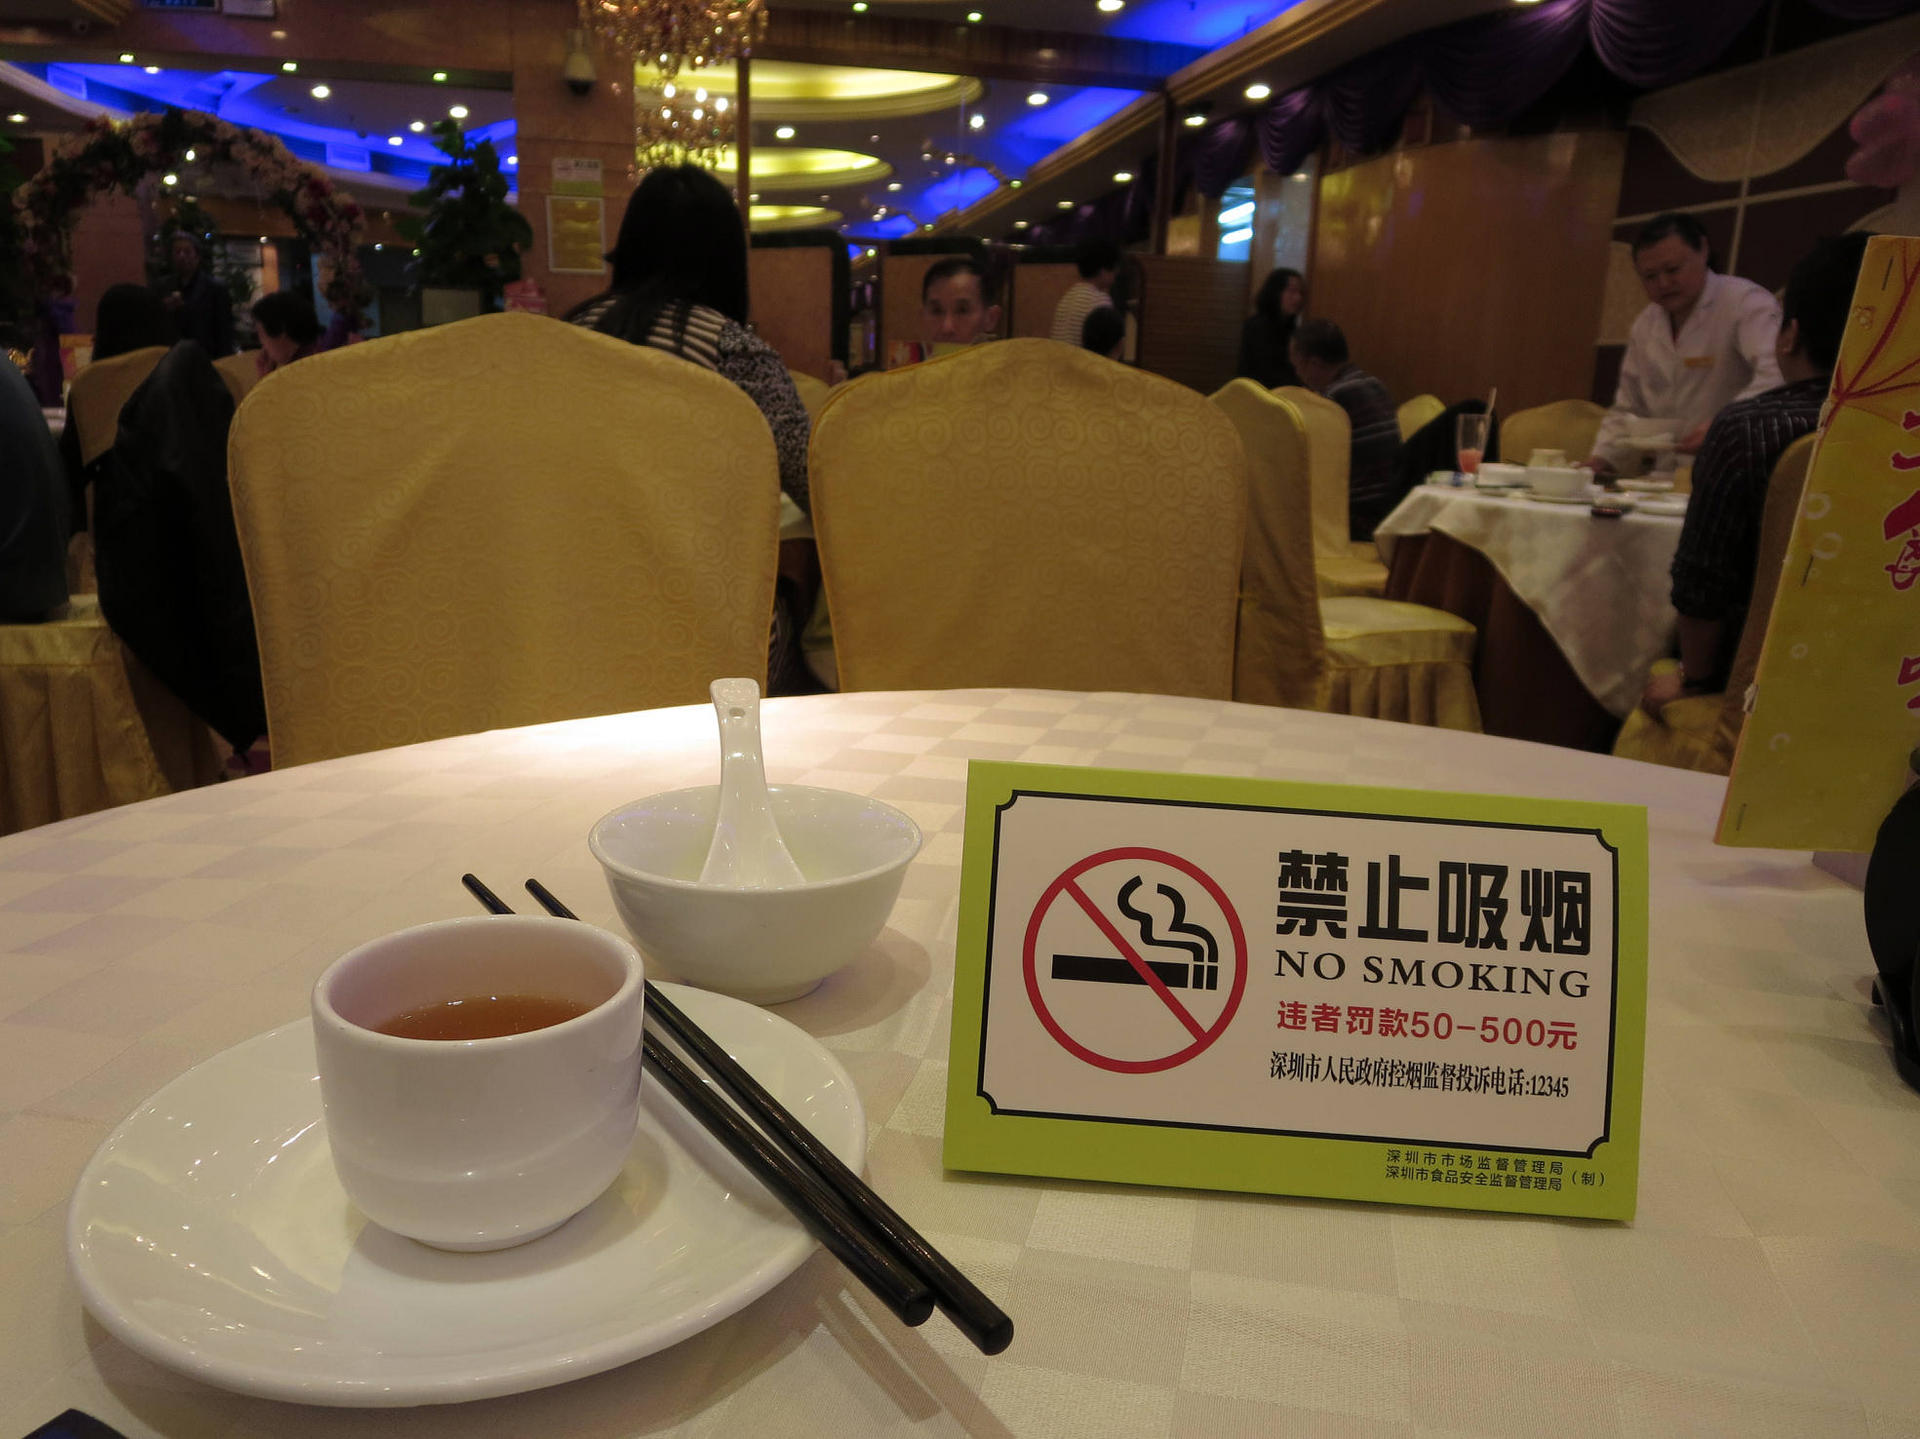 Butting out: a "No Smoking" sign in a restaurant in Shenzhen. Photo: Cecilie Gamst Berg